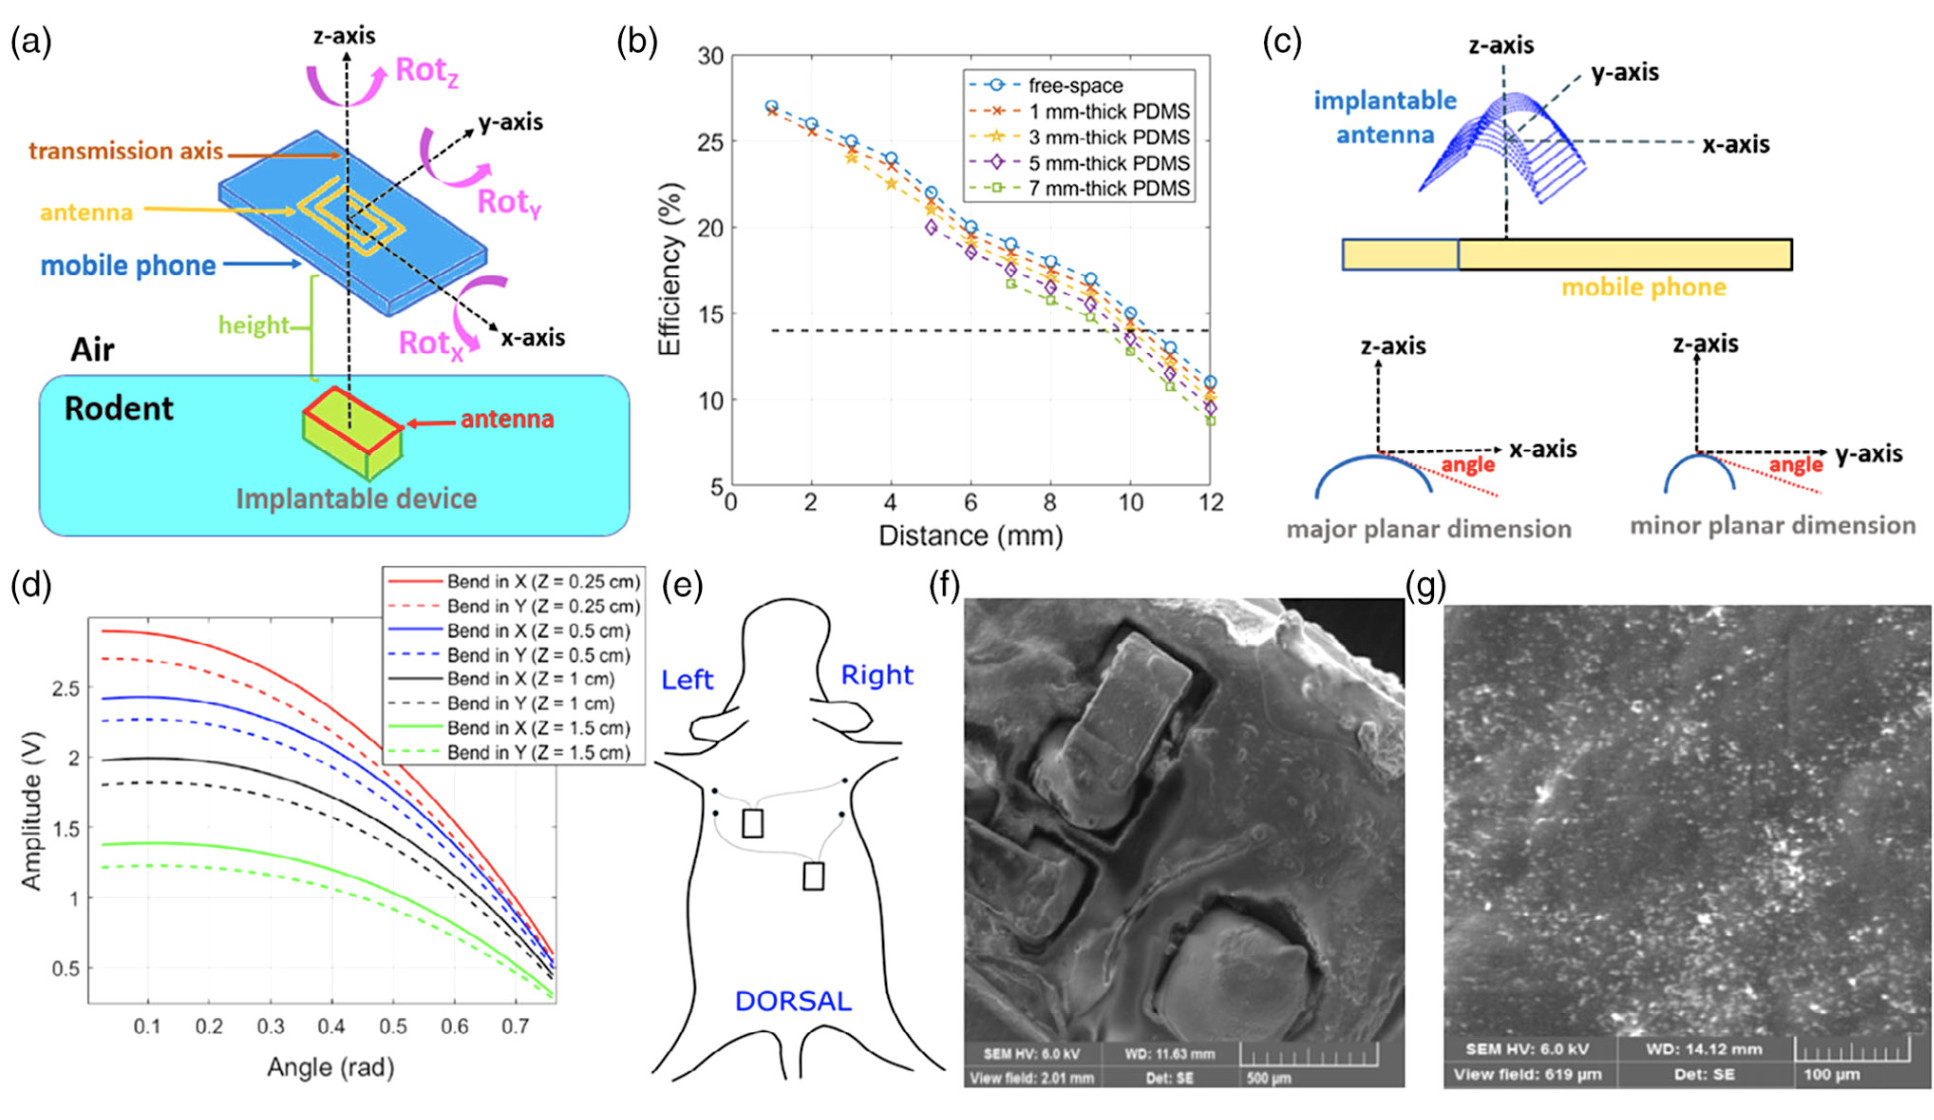 Experimental setups devised for NFC transmission efficiency characterization and the animal trial